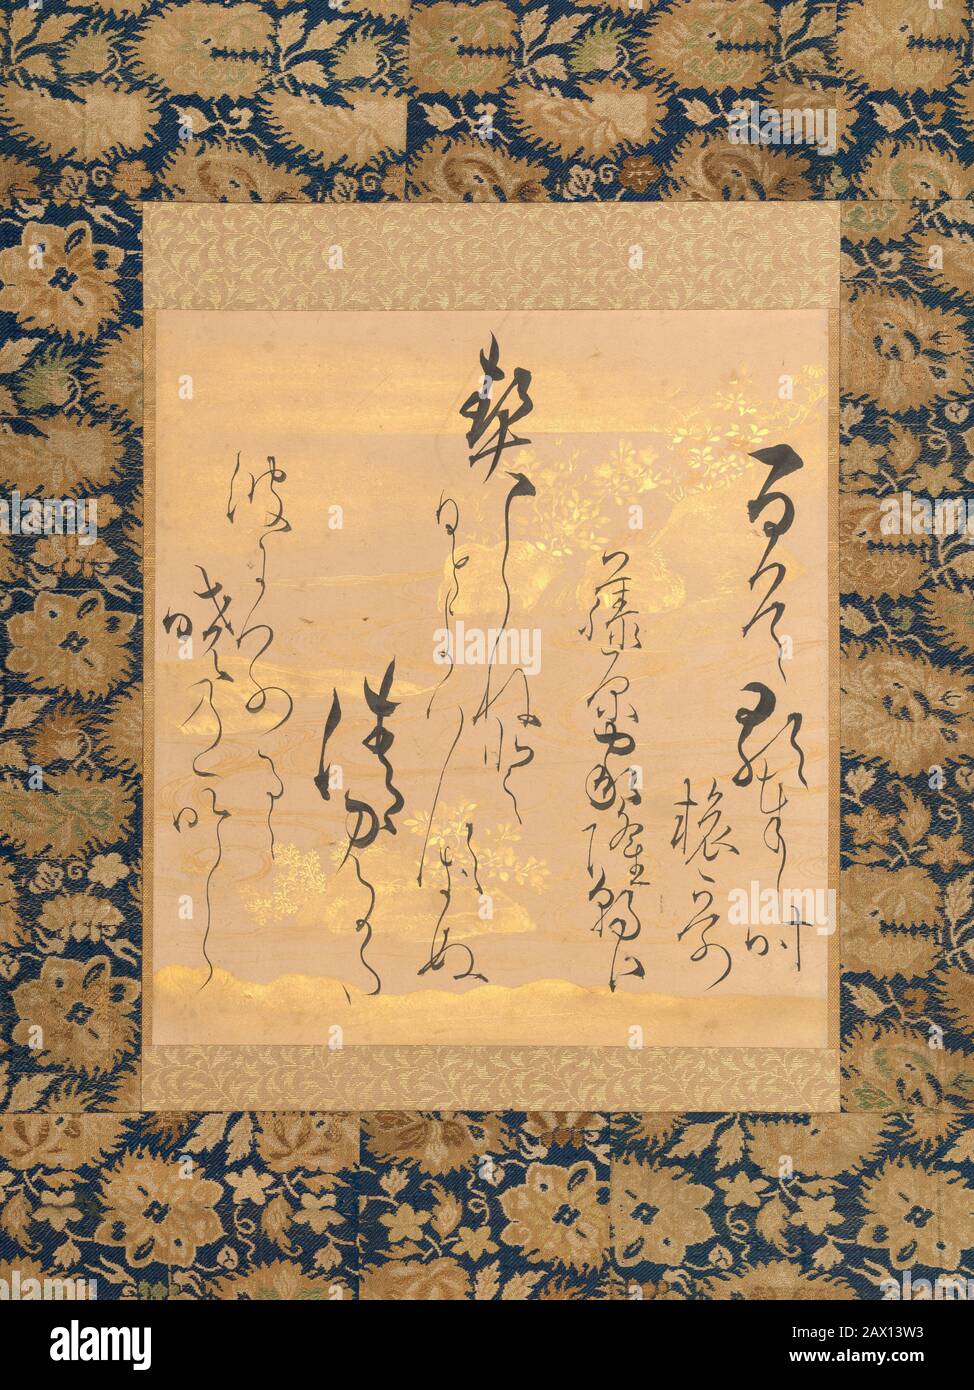 Poem by Fujiwara no Ietaka (1158-1237) on Decorated Paper with Bush Clover, mid- to late 17th century. Stock Photo